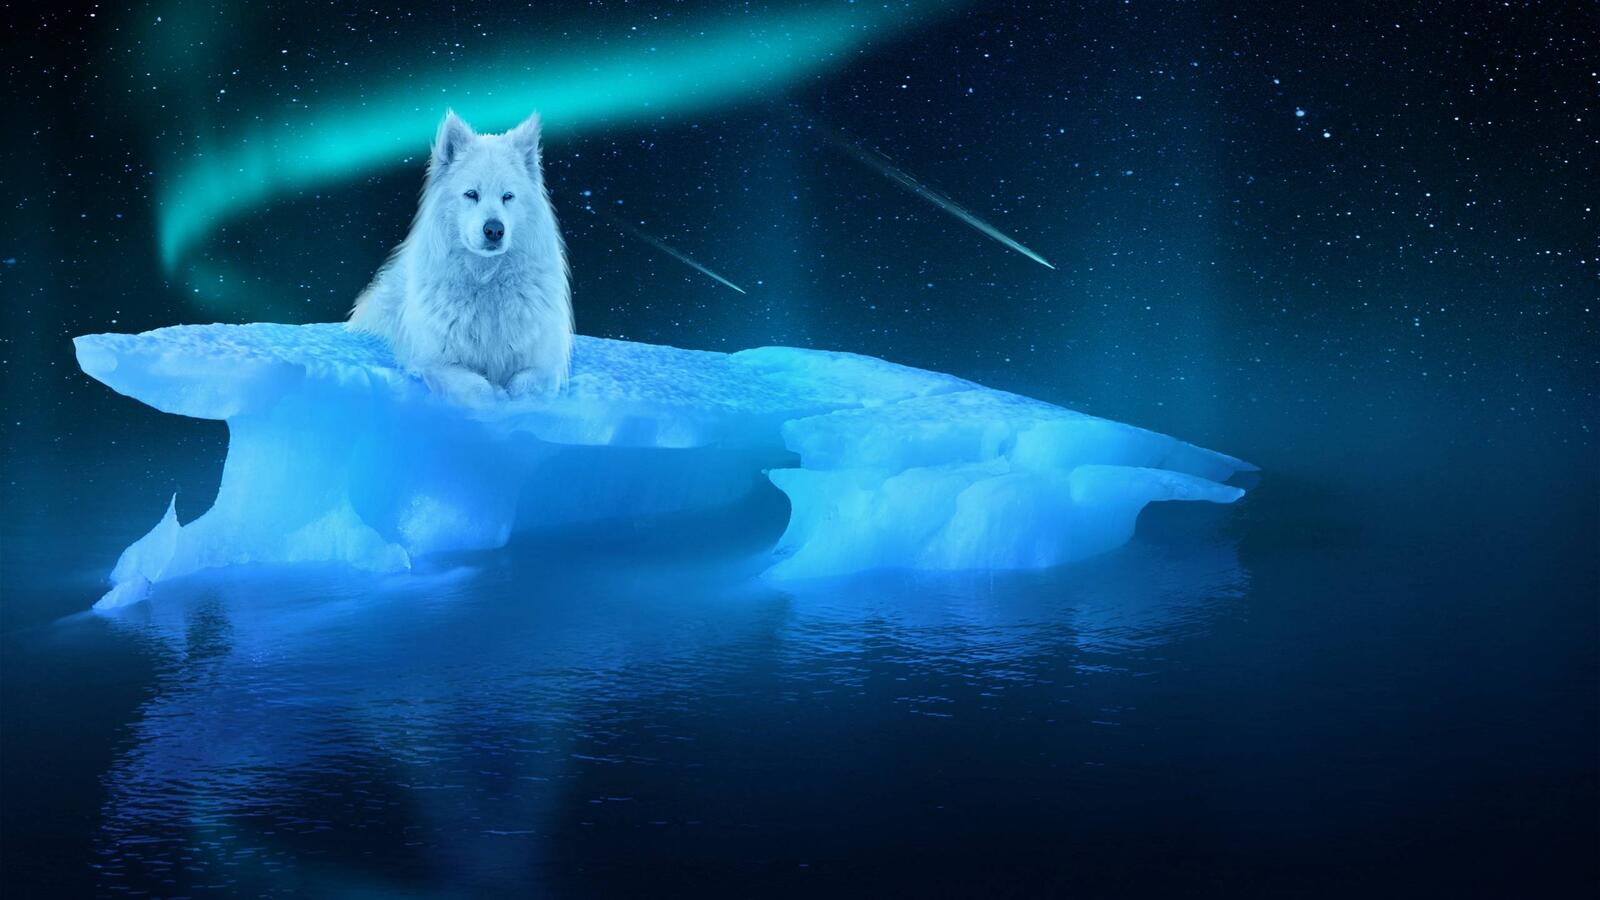 Wallpapers night ice white wolf on the desktop